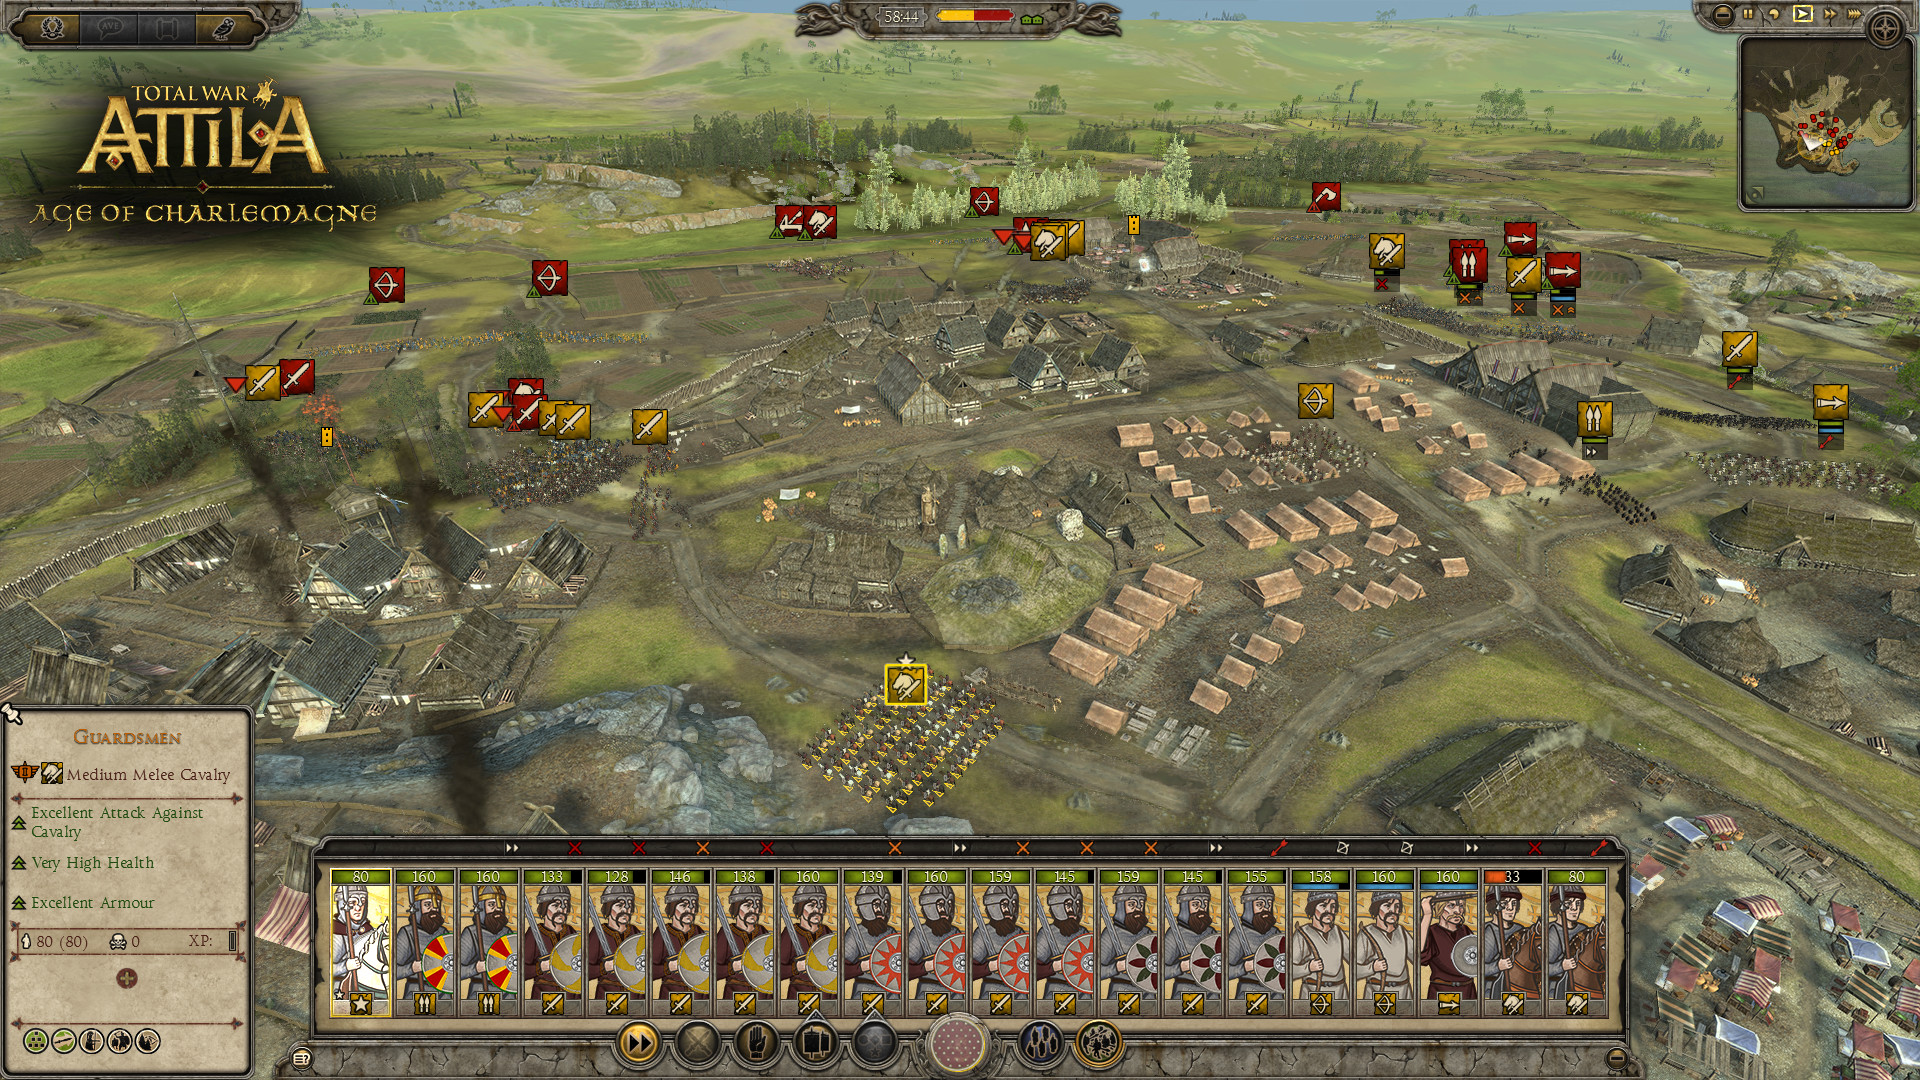 Total War: ATTILA - Age of Charlemagne Campaign Pack on Steam